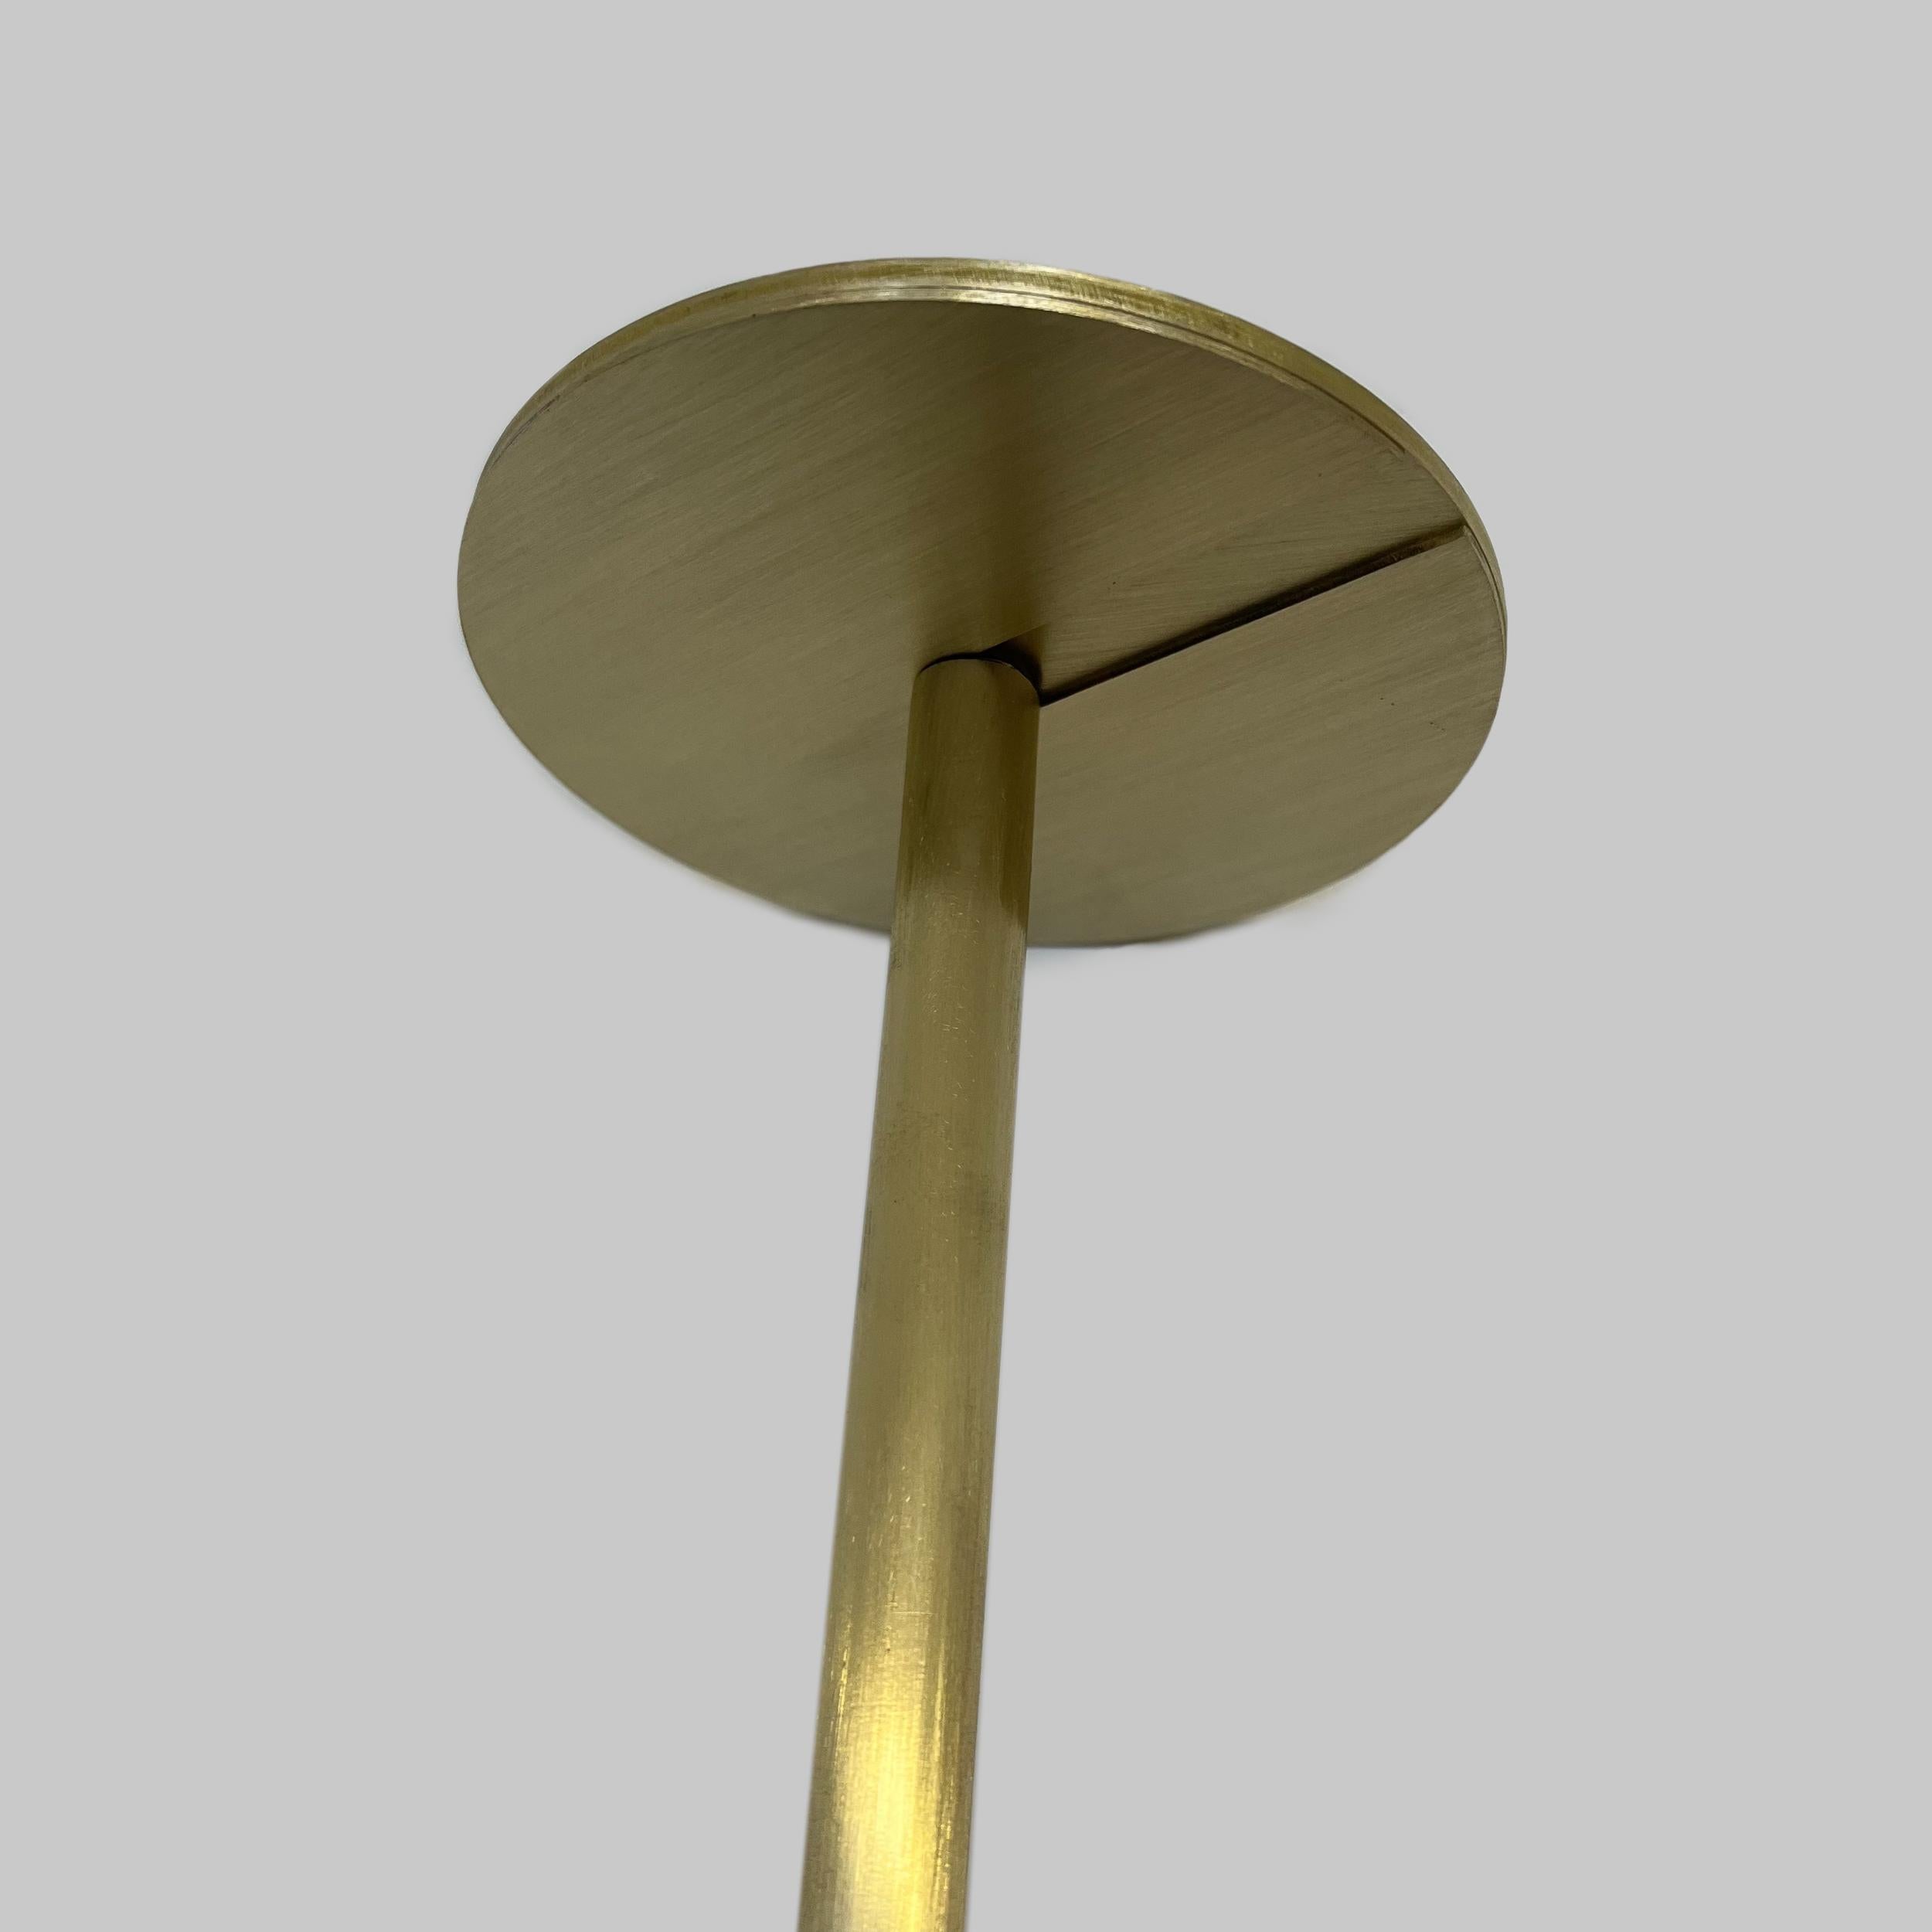 Orbis Ceiling Hanging Suspended Round Art Deco Mirror with a Brushed Brass Frame For Sale 2